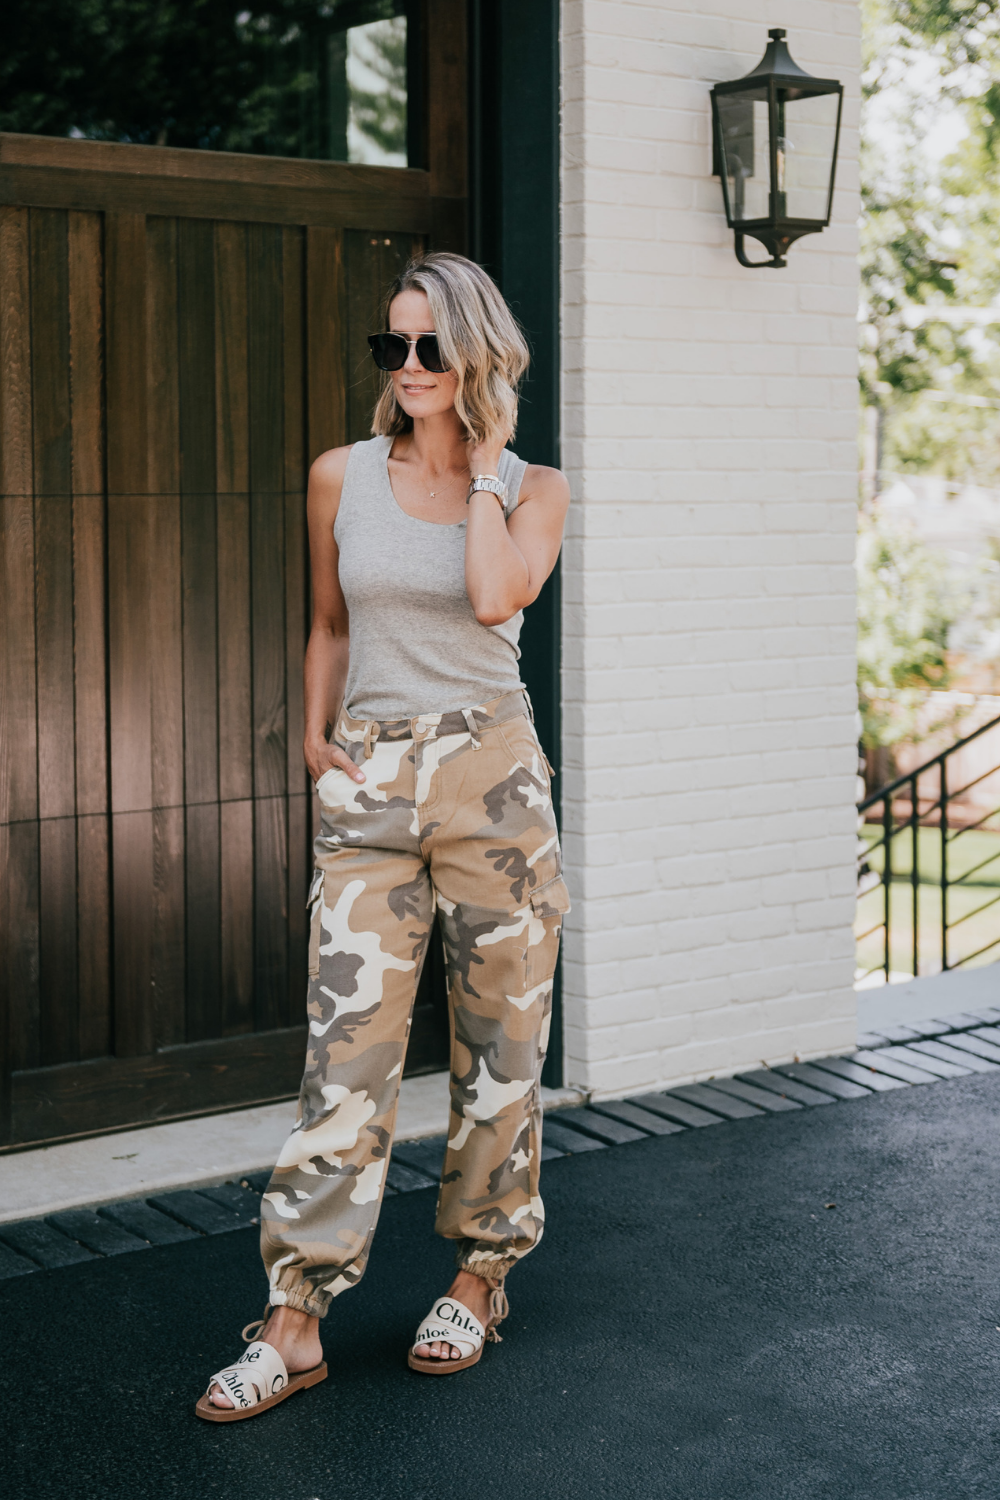 Summer to fall style: tank and camo pants 